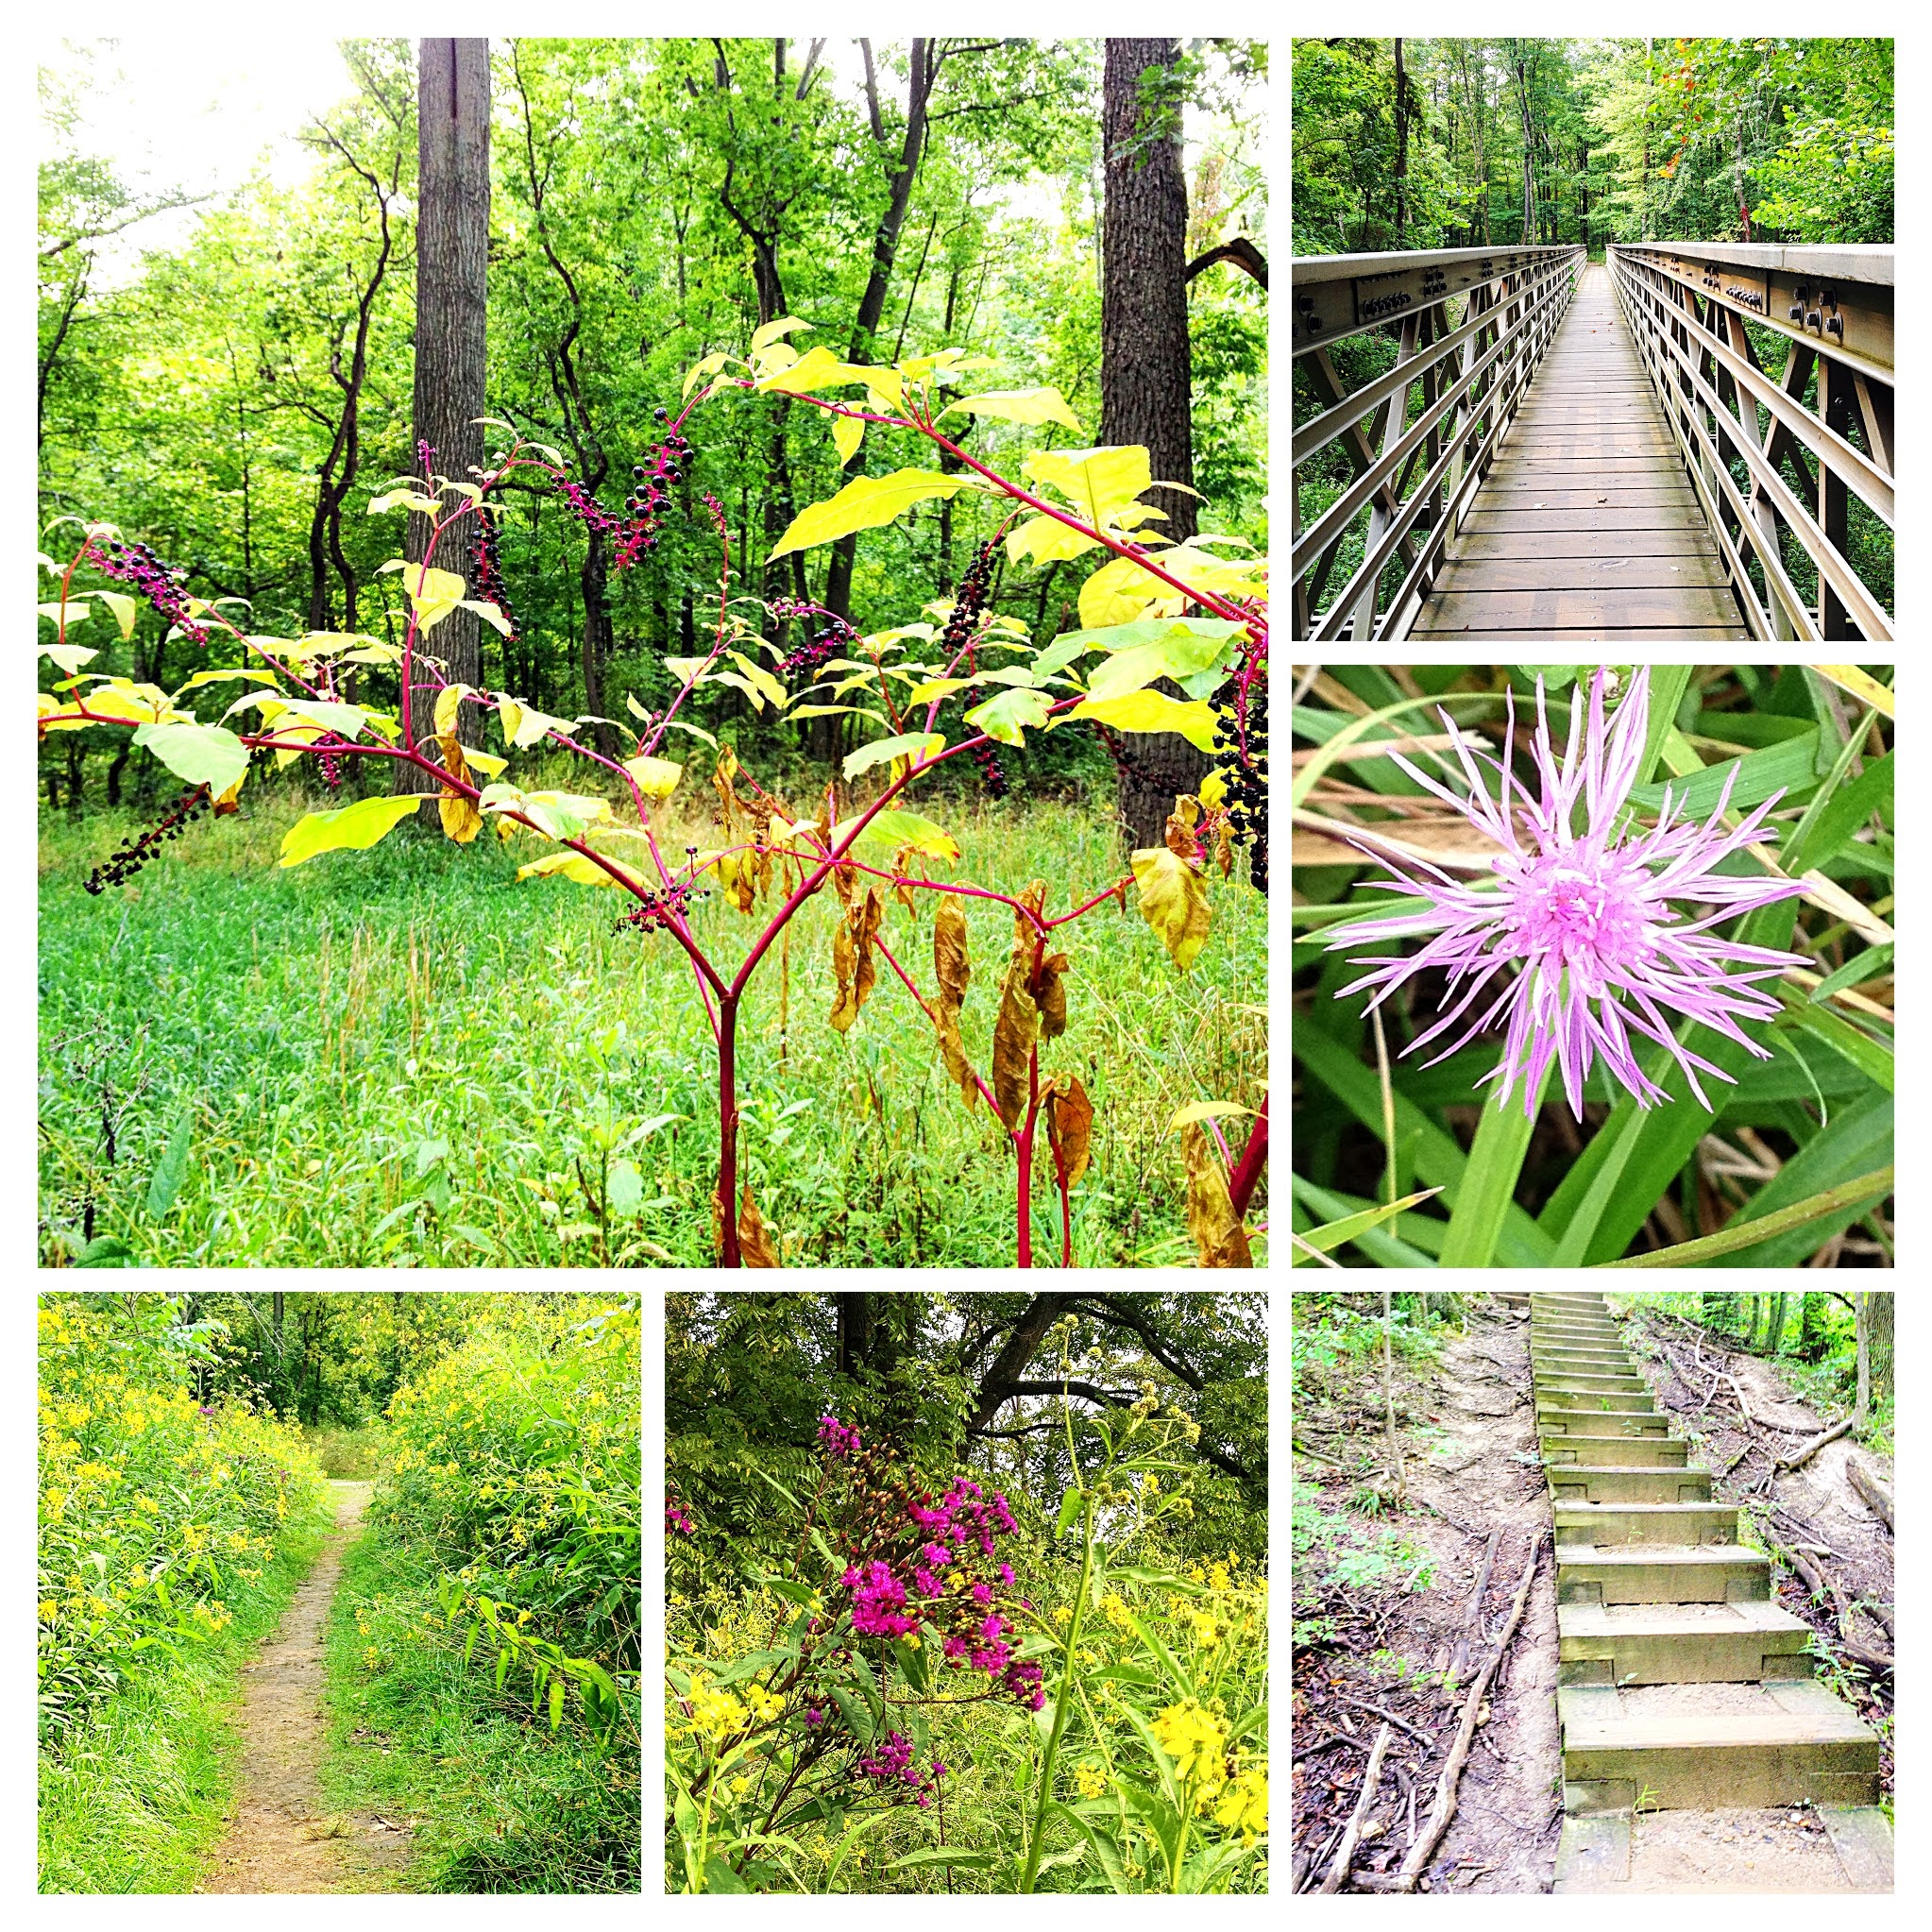 Bridges, stairs, and paths lead through wildflower dotted fields.